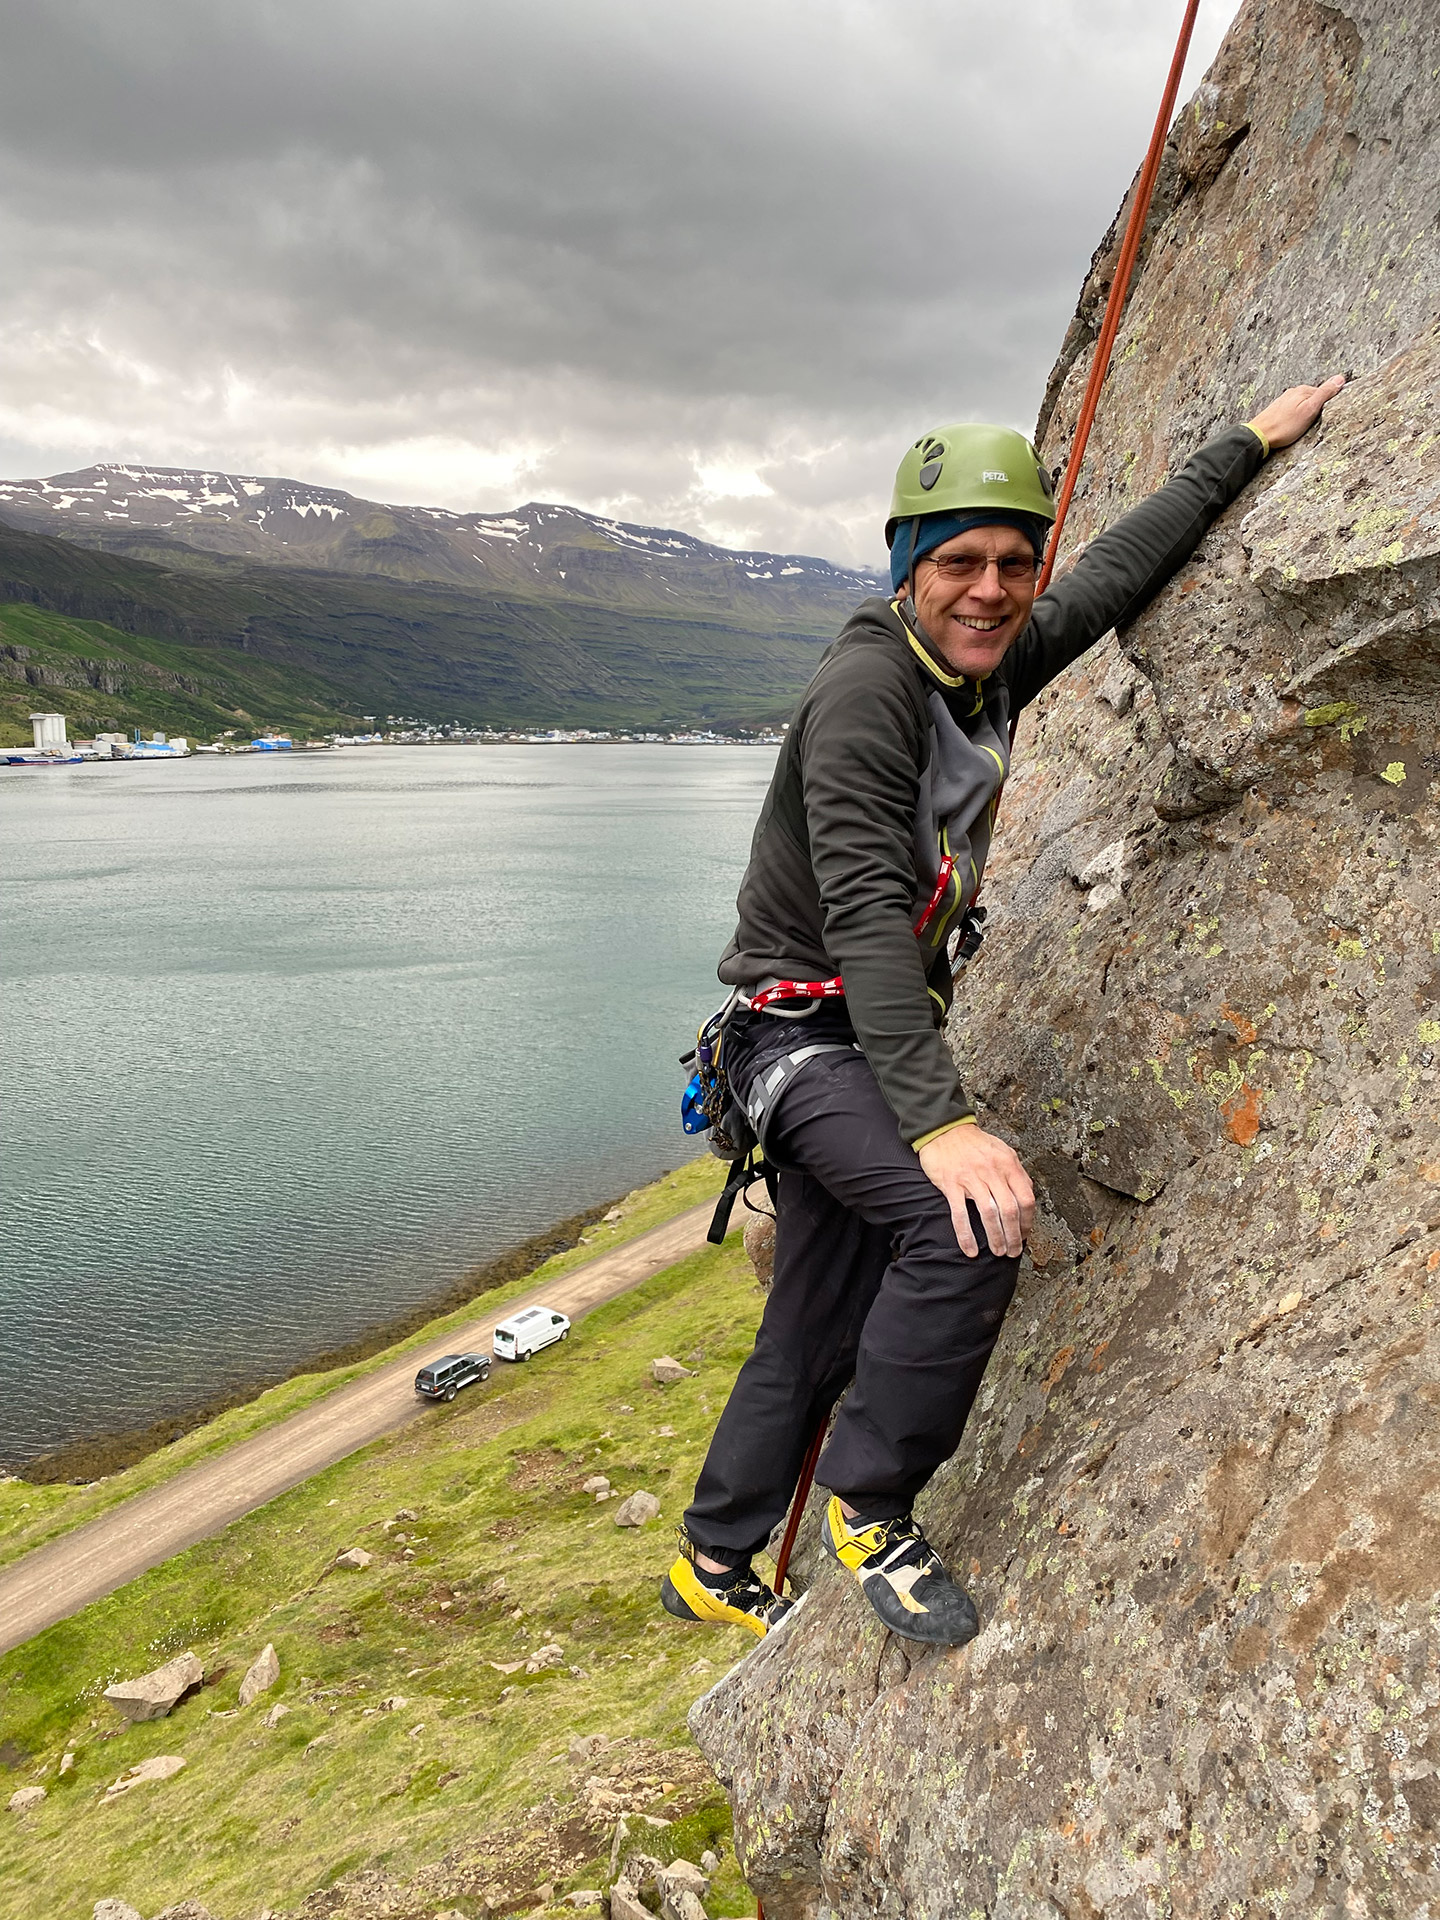 A happy climber working his way up the cliff at Arnarklettar in Seyðisfjörður with an overview of the town in the background.